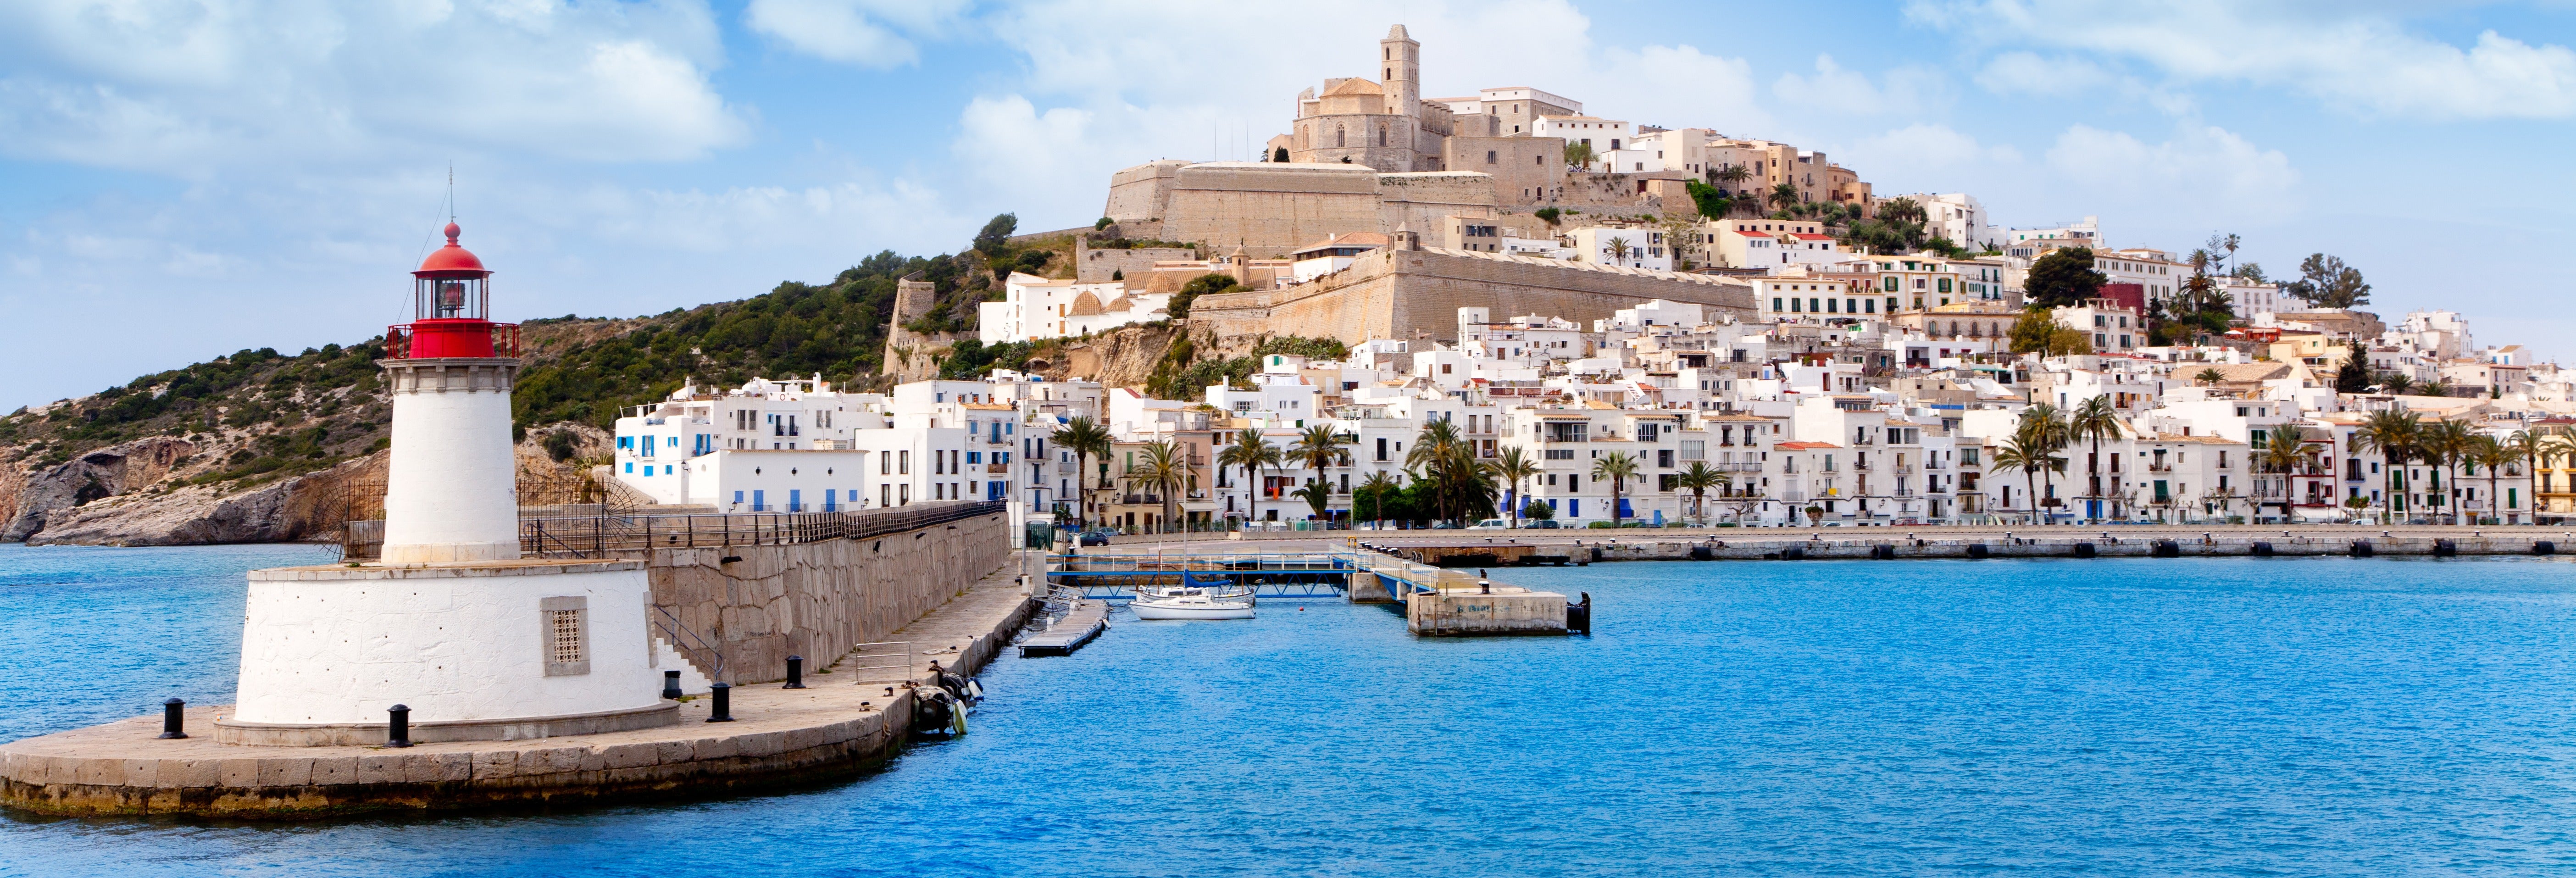 Activities, Guided Tours and Day Trips in Ibiza 